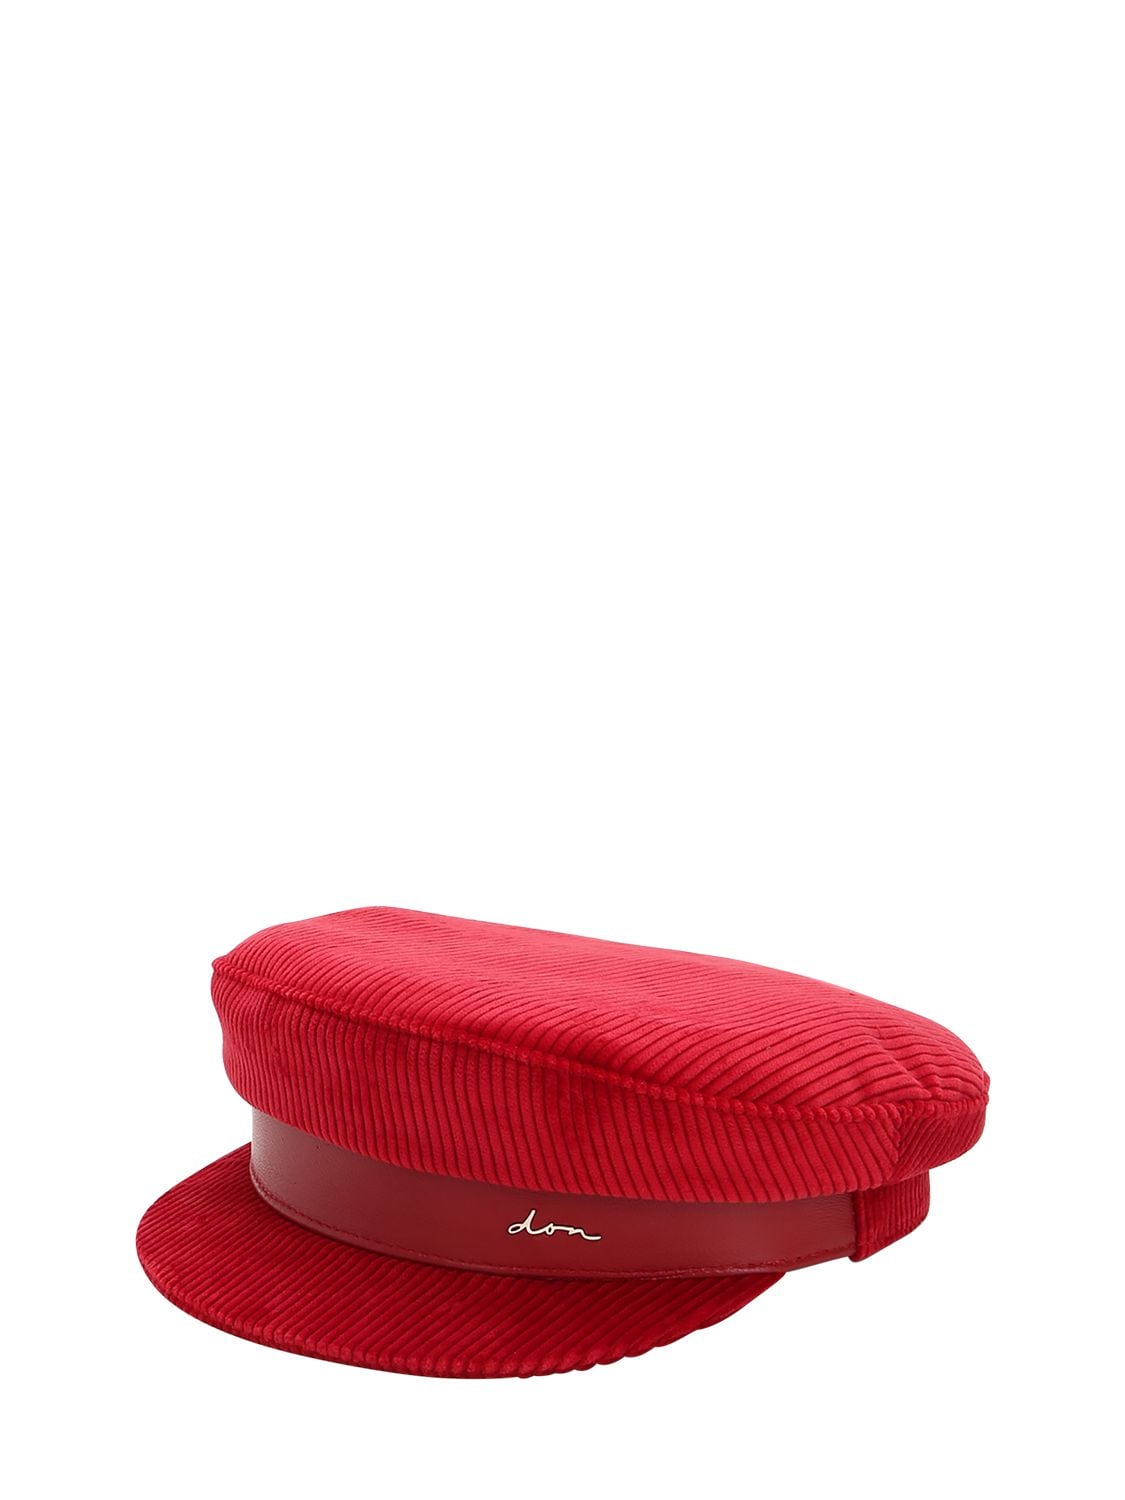 Don Corduroy Captain's Hat In Red